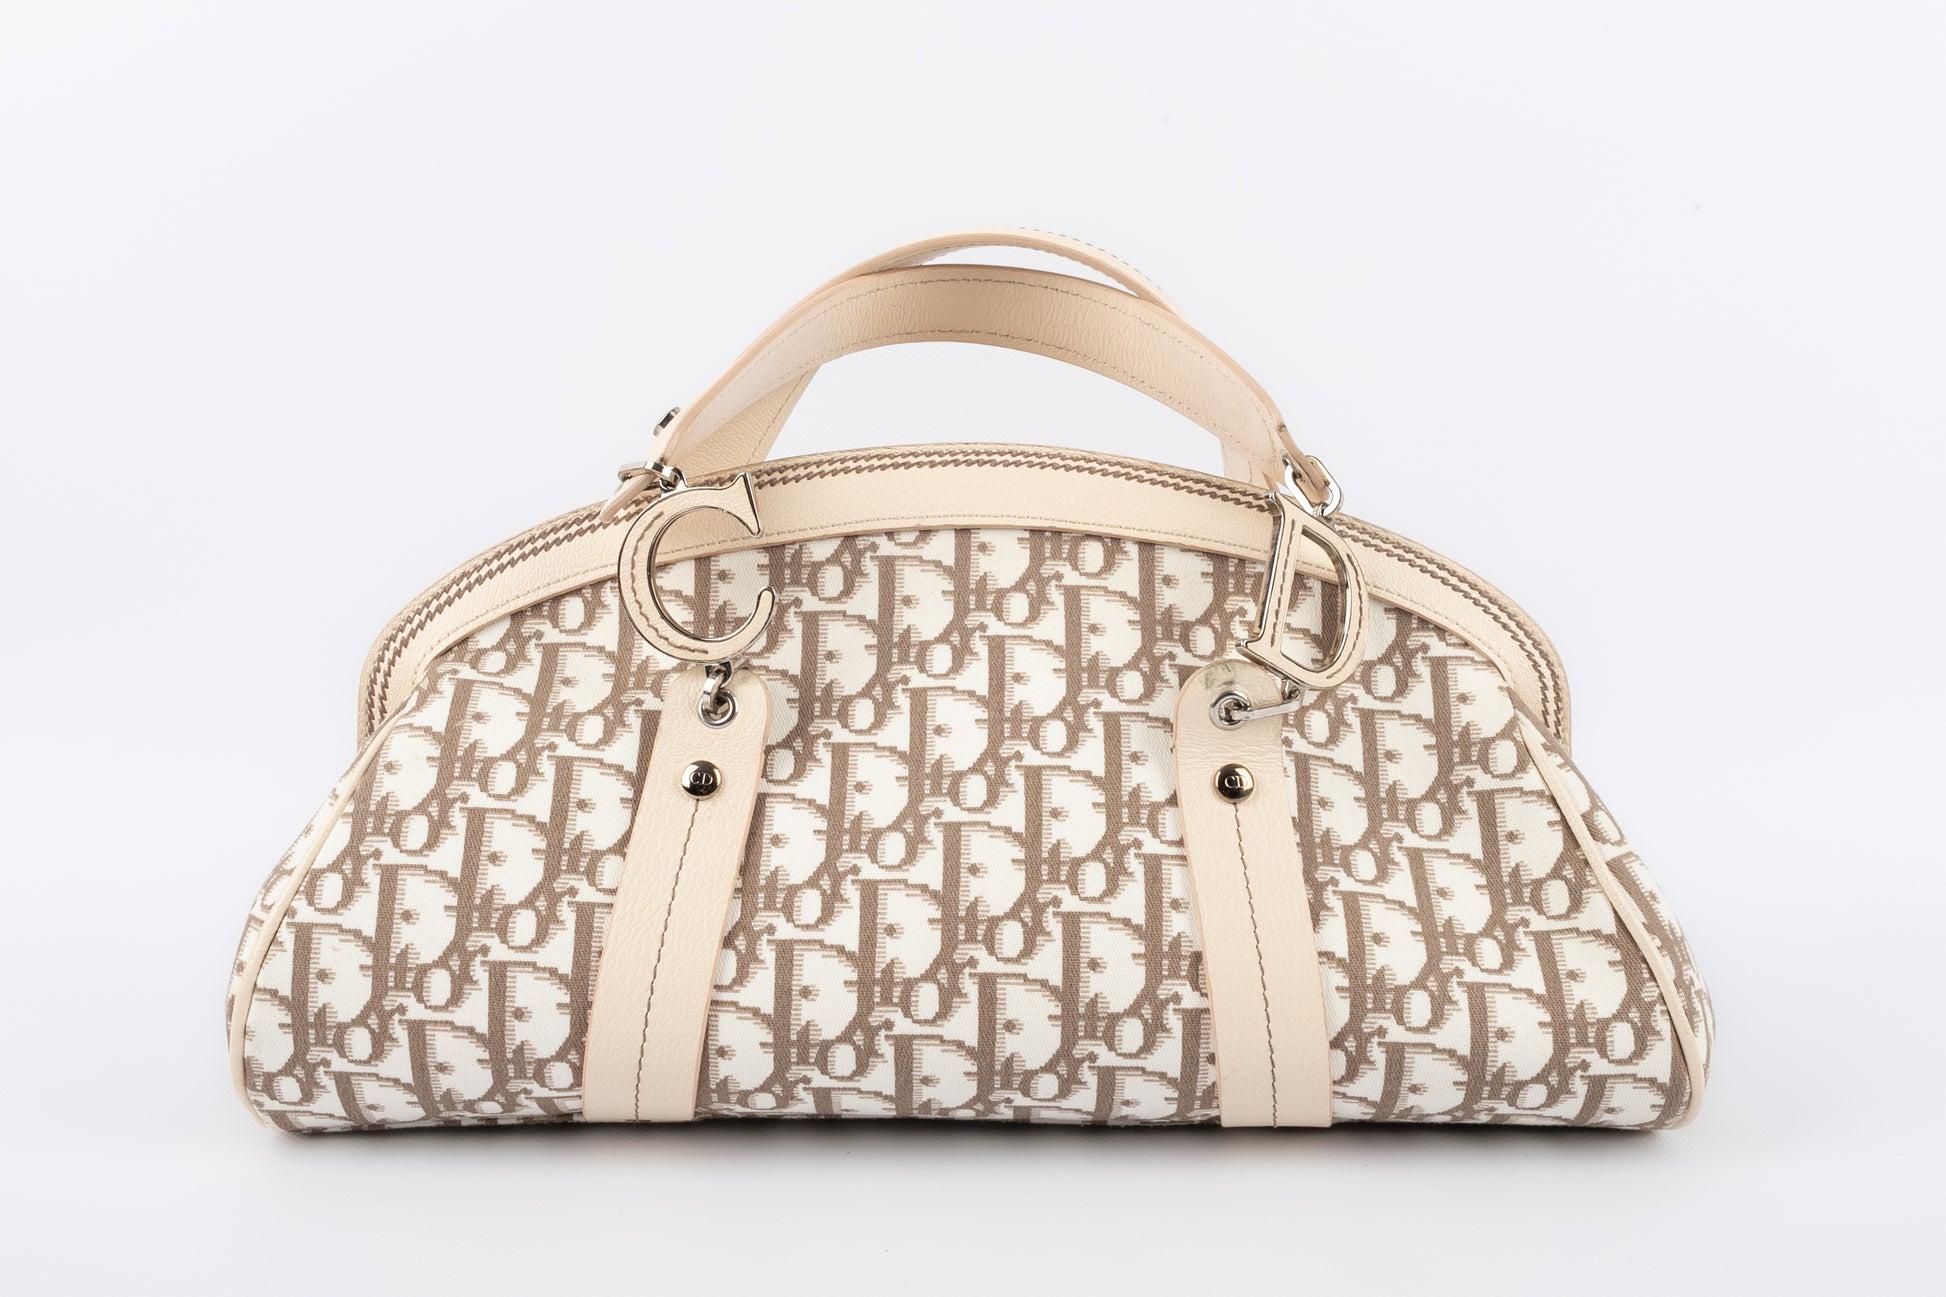 Dior - (Made in Italy) Beige leather bag with a monogrammed fabric embroidered with multicolored floral patterns. Bag with a serial number. 2005 Spring-Summer Collection.

Additional information:
Condition: Very good condition
Dimensions: Length: 32